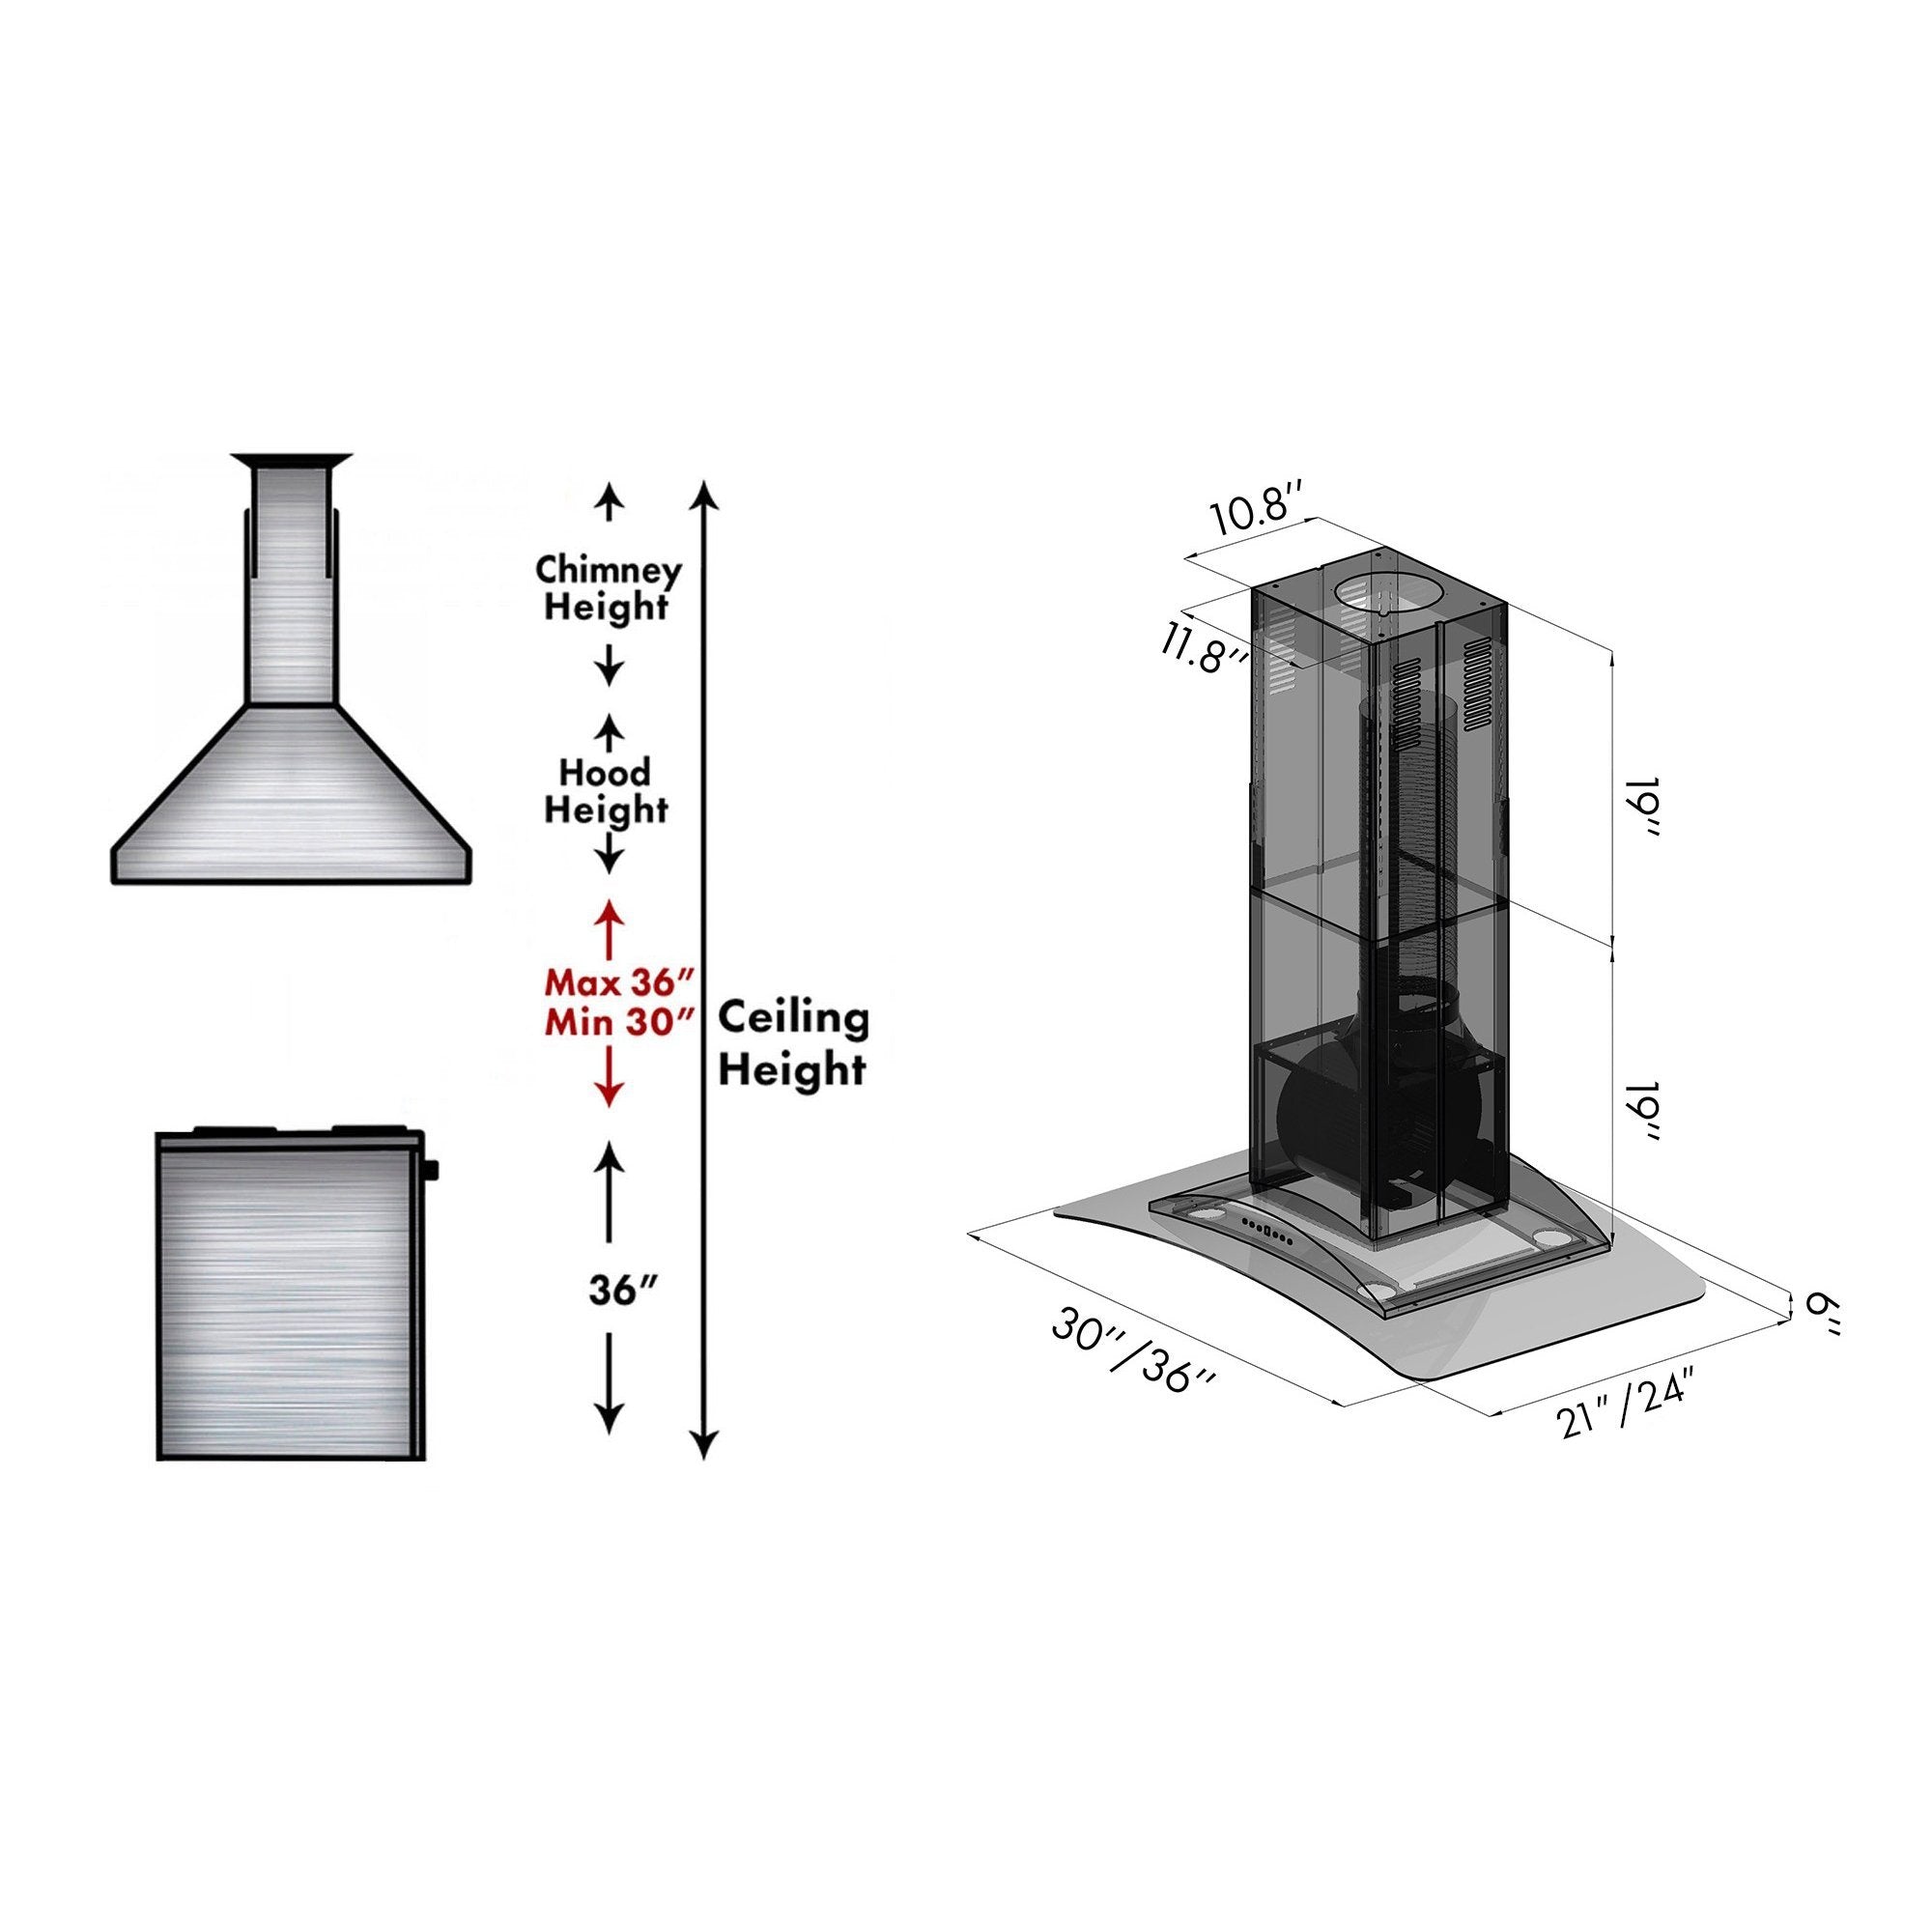 ZLINE Convertible Vent Island Mount Range Hood in Stainless Steel and Glass (GL9i) chimney height guide and dimensional diagram.